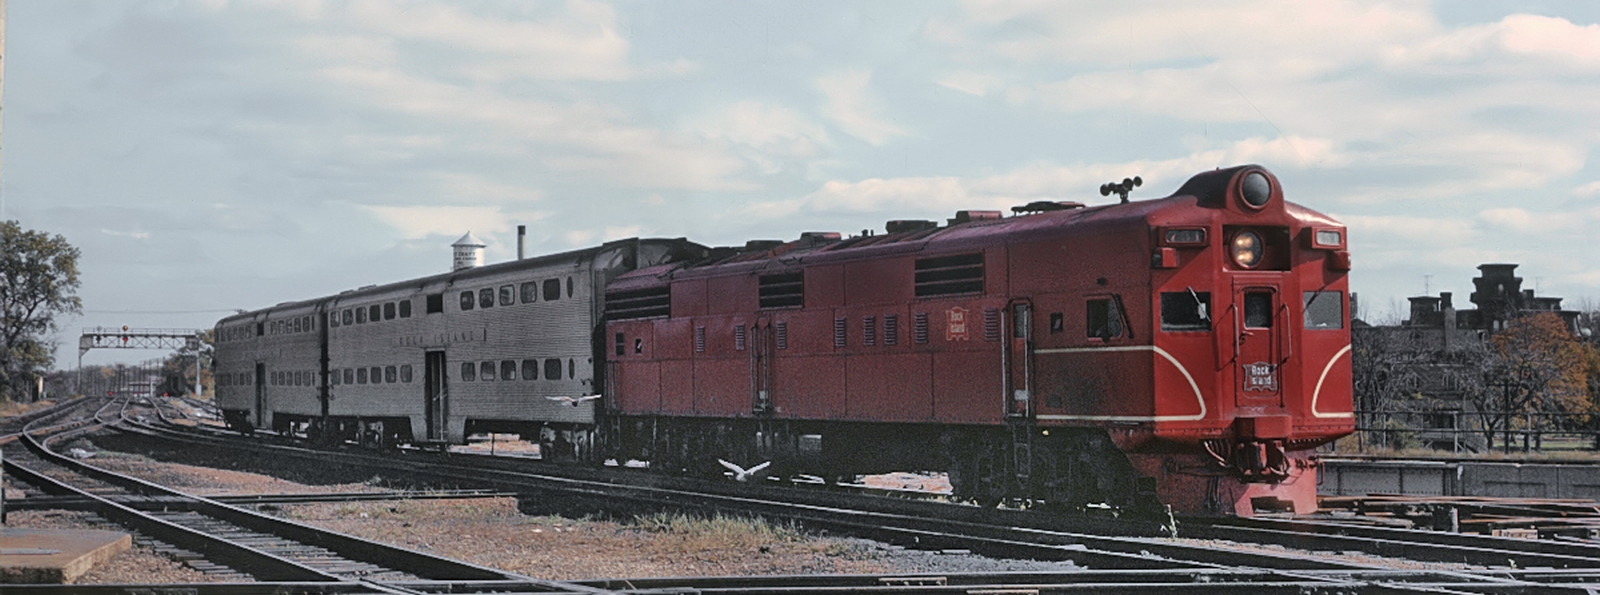 AB6 in October 1966 with bi-level cars in suburban service in Joliet, Illinois